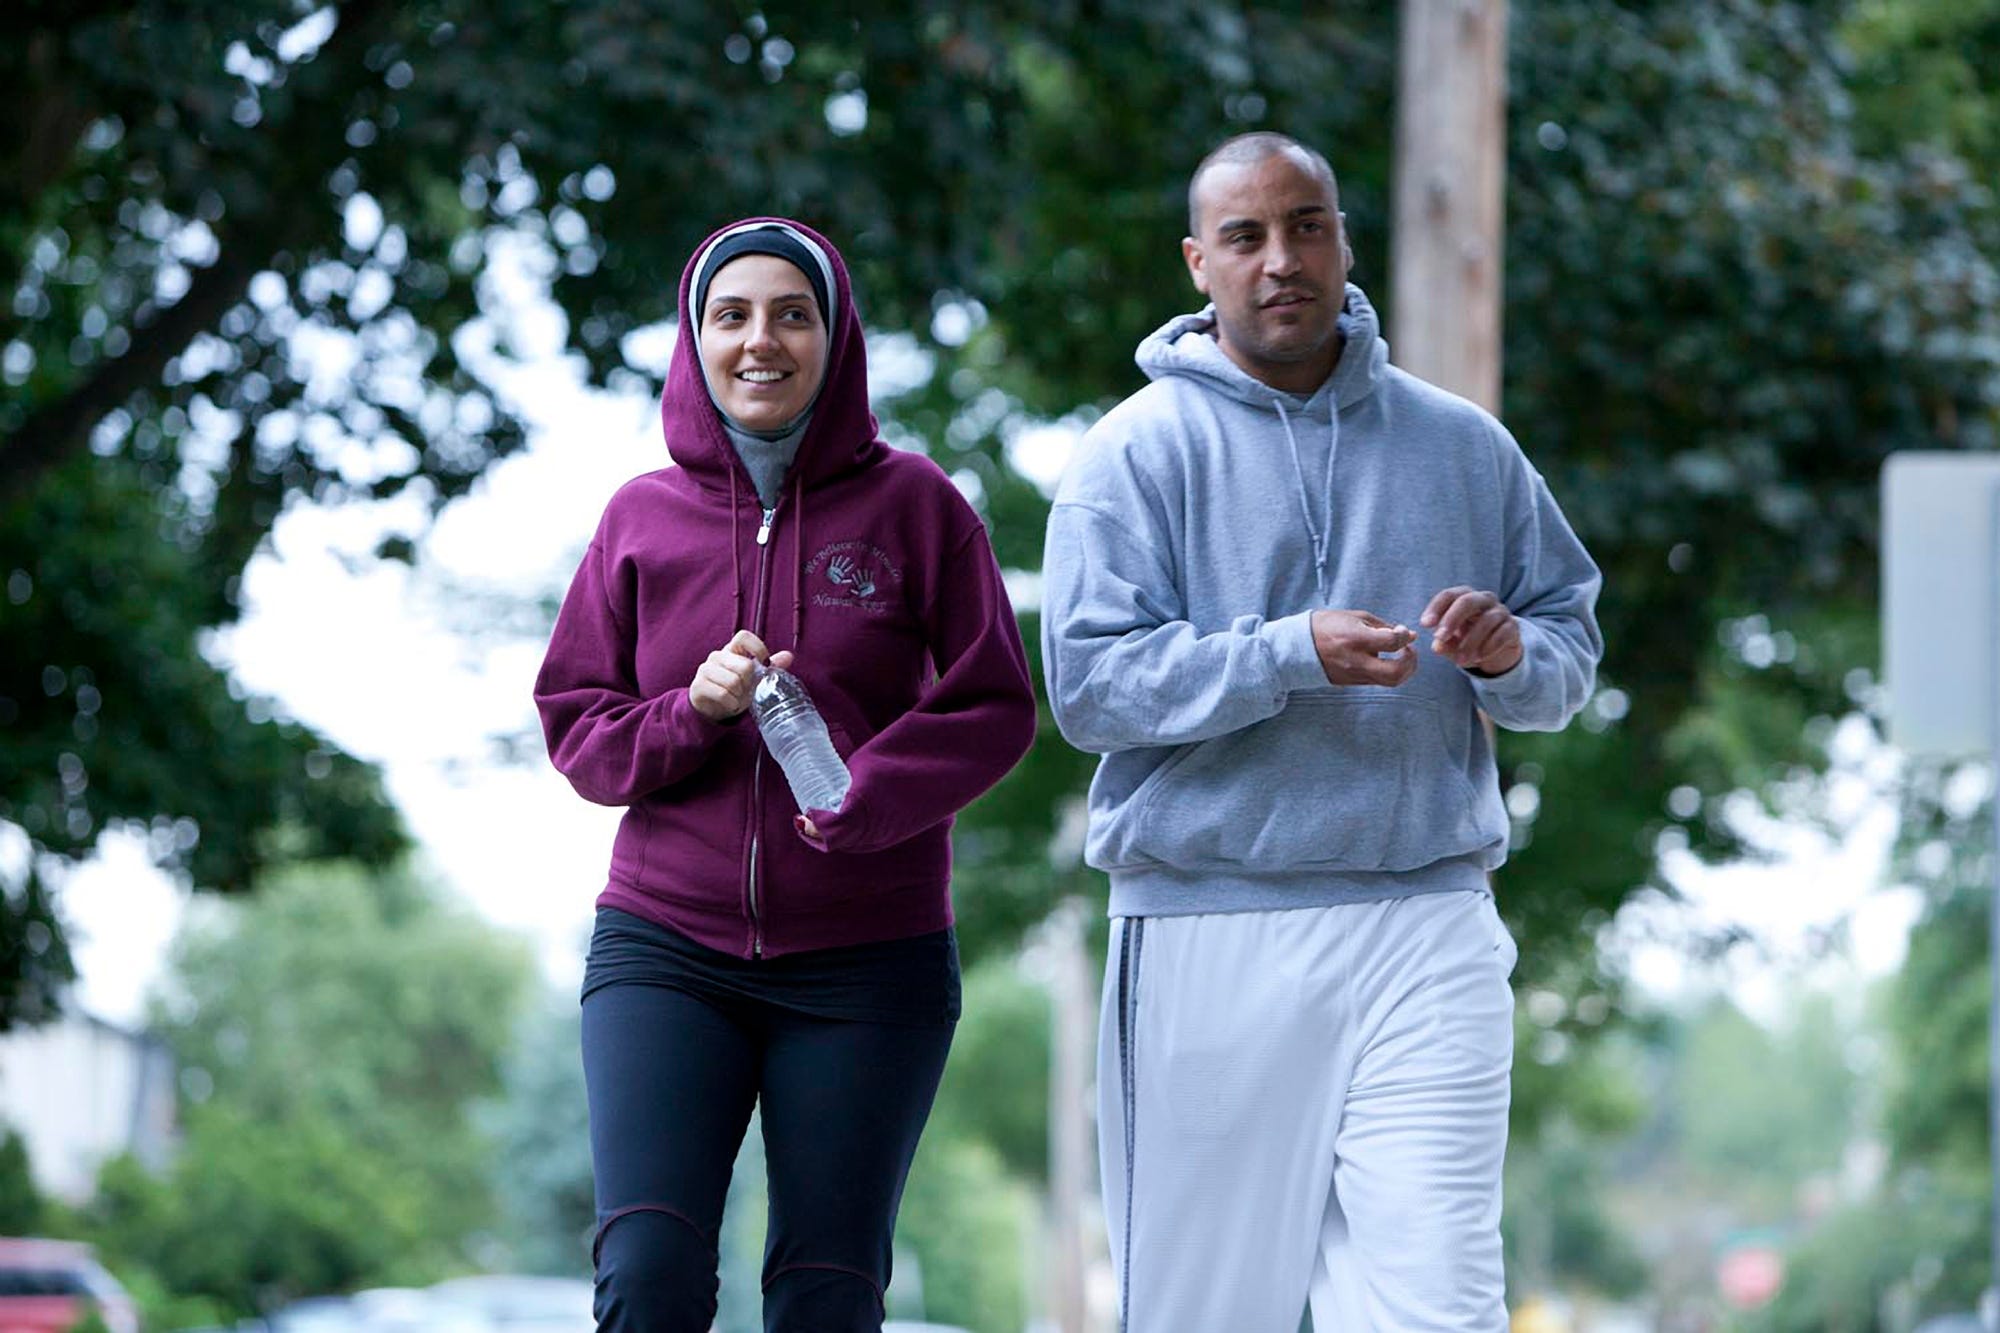 Nawal Aoude, a pediatric respiratory therapist, left, and her husband Nader go for a walk in a scene from the TLC series "All-American Muslim."